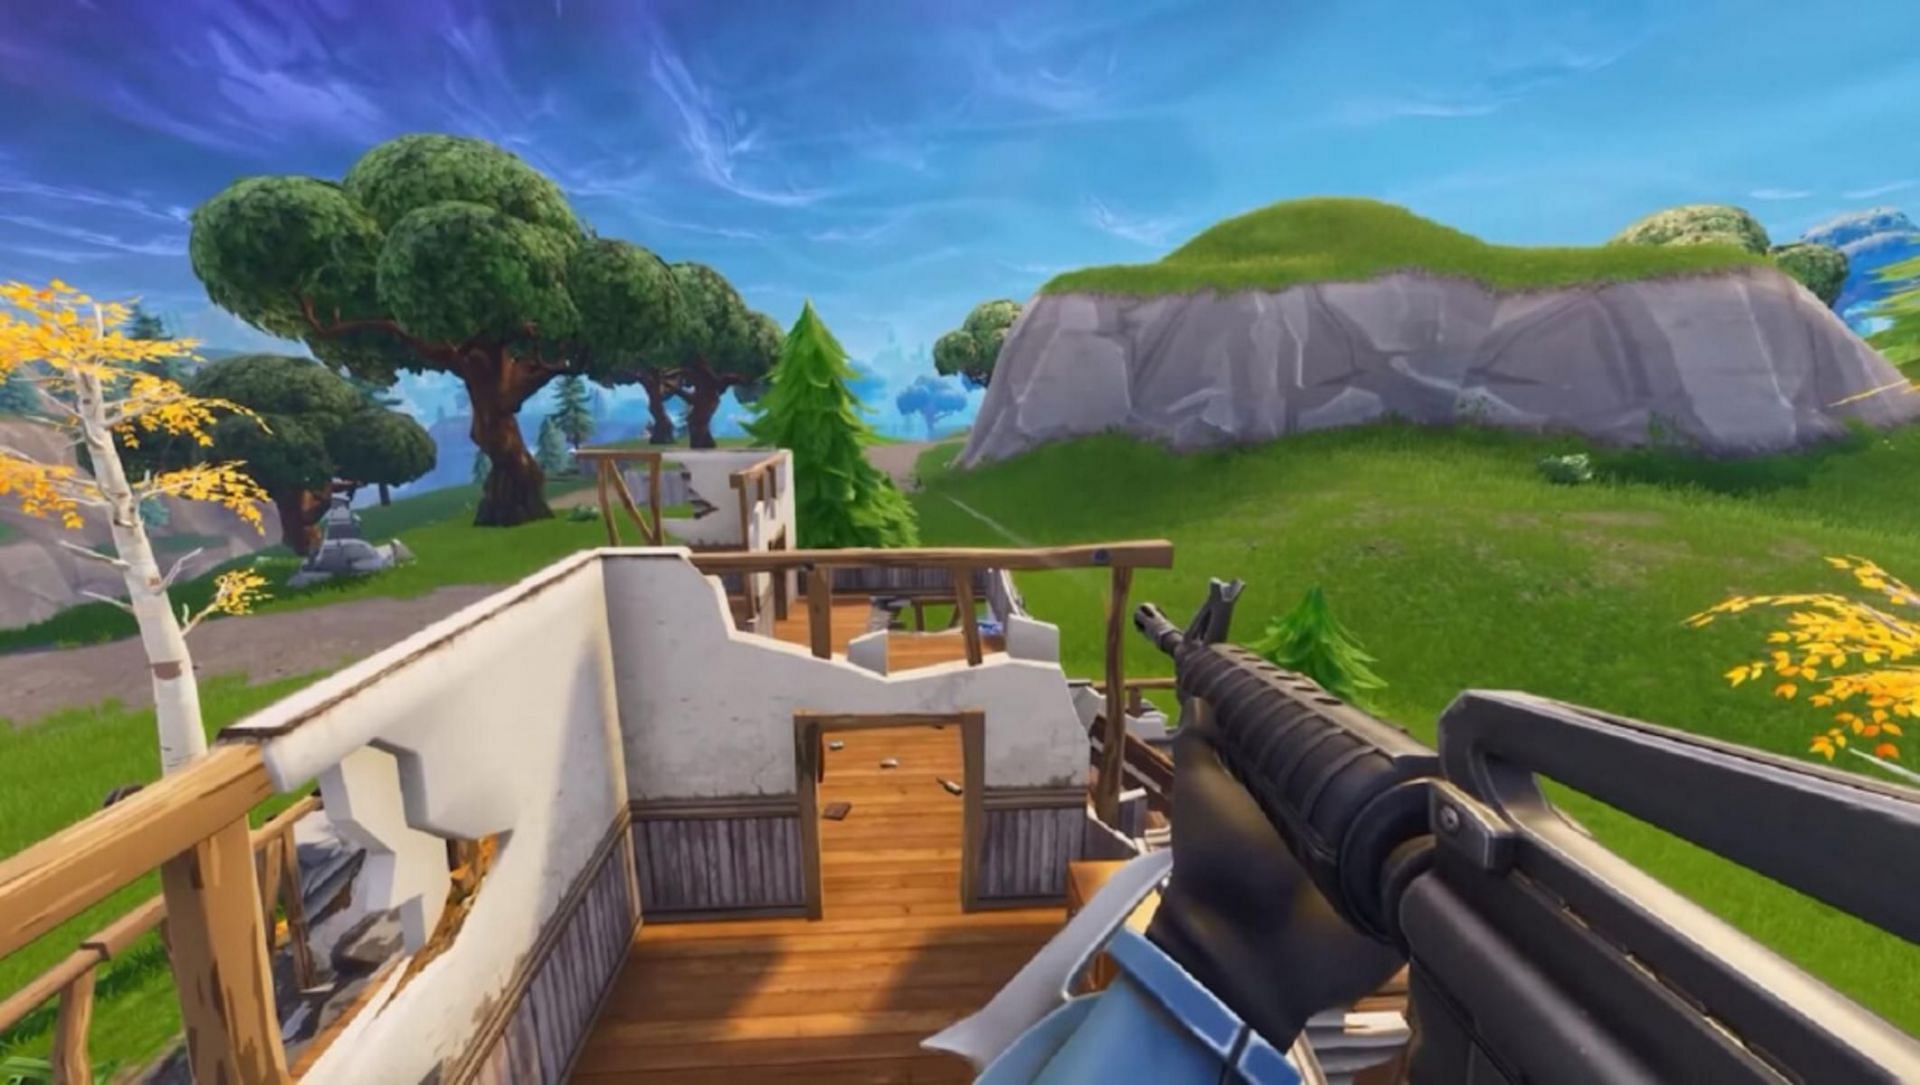 Fortnite YouTuber conceptualizes the game in first-person, gives COD a run for its money